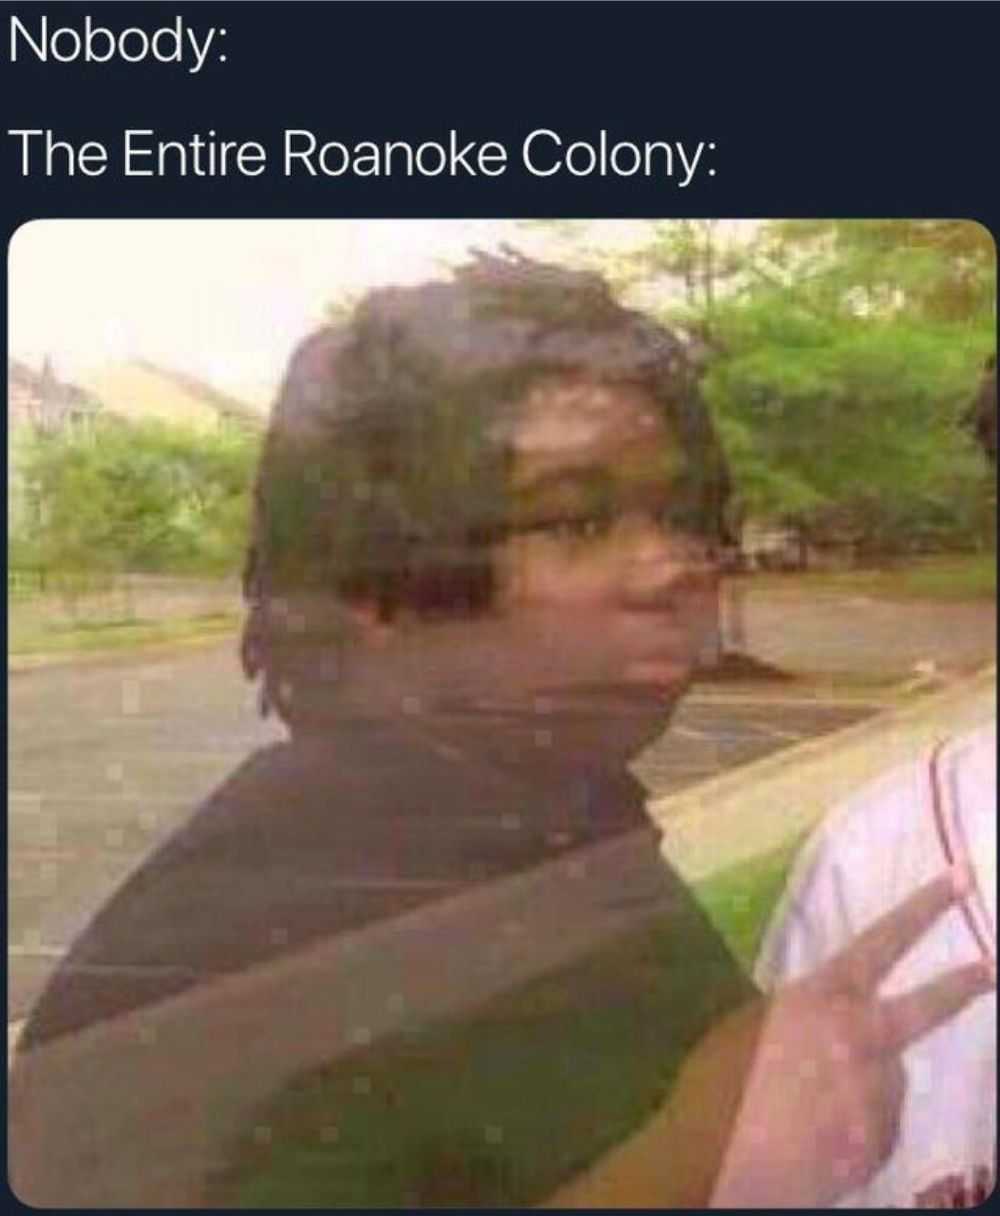 A meme about the disappearance of the Roanoke colony